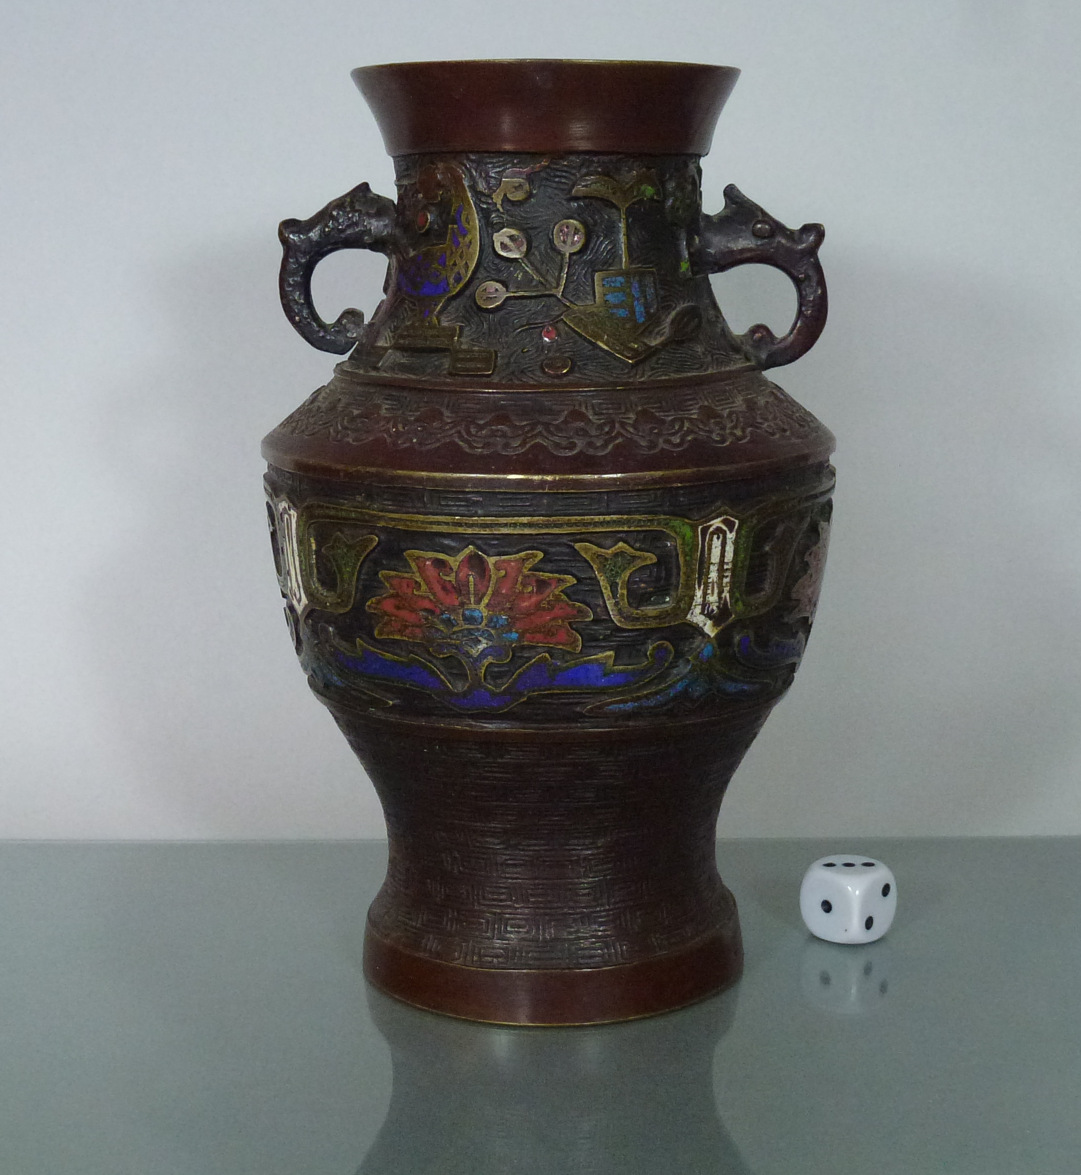 Qing Dynasty Bronze Vase – Archaic Style